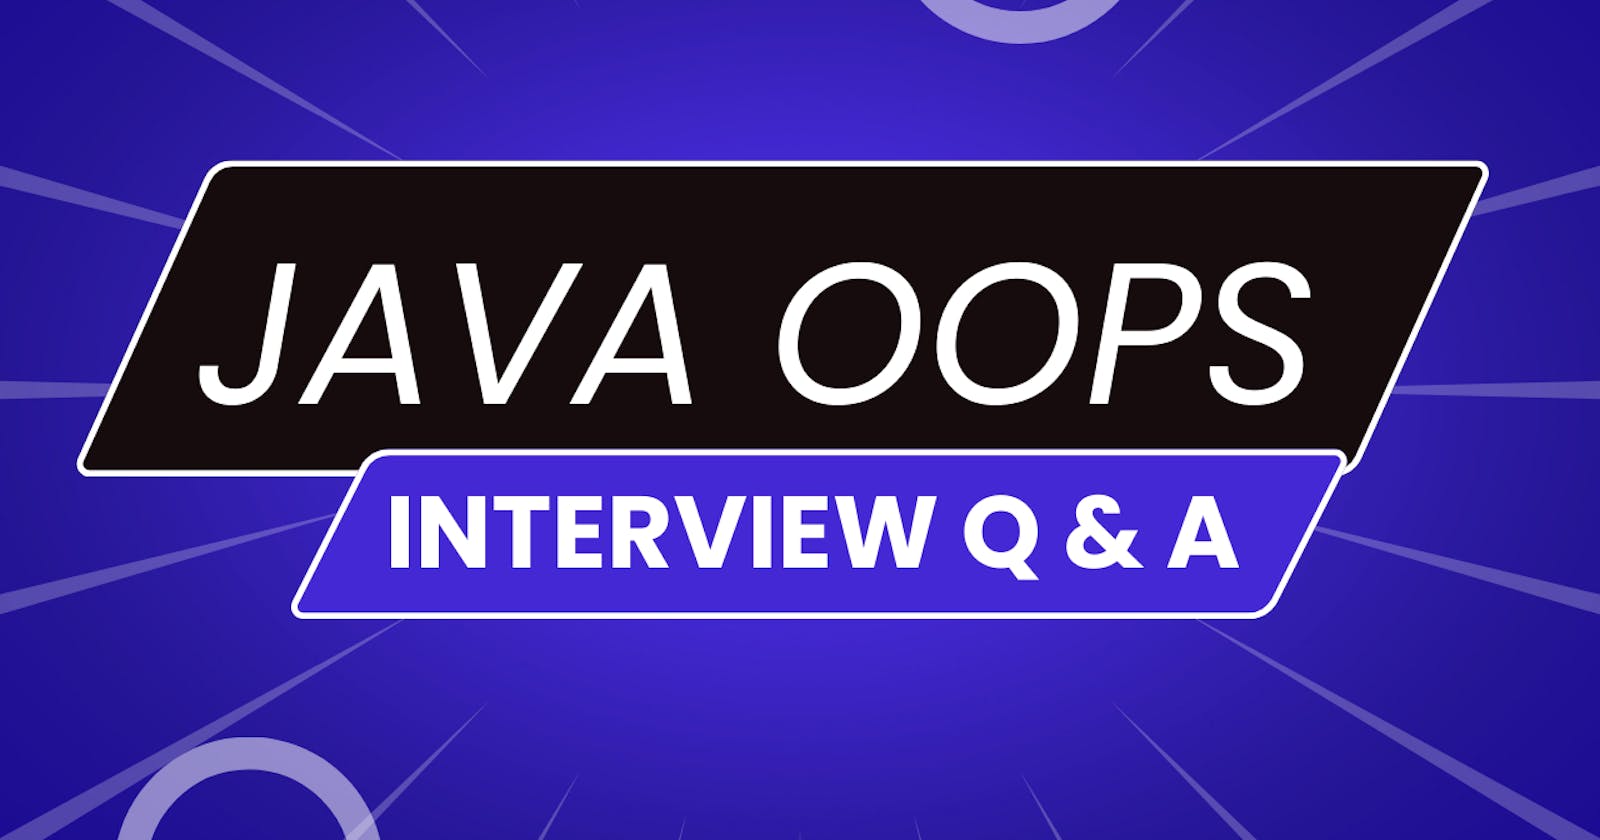 Top OOPS Interview Questions & Answers